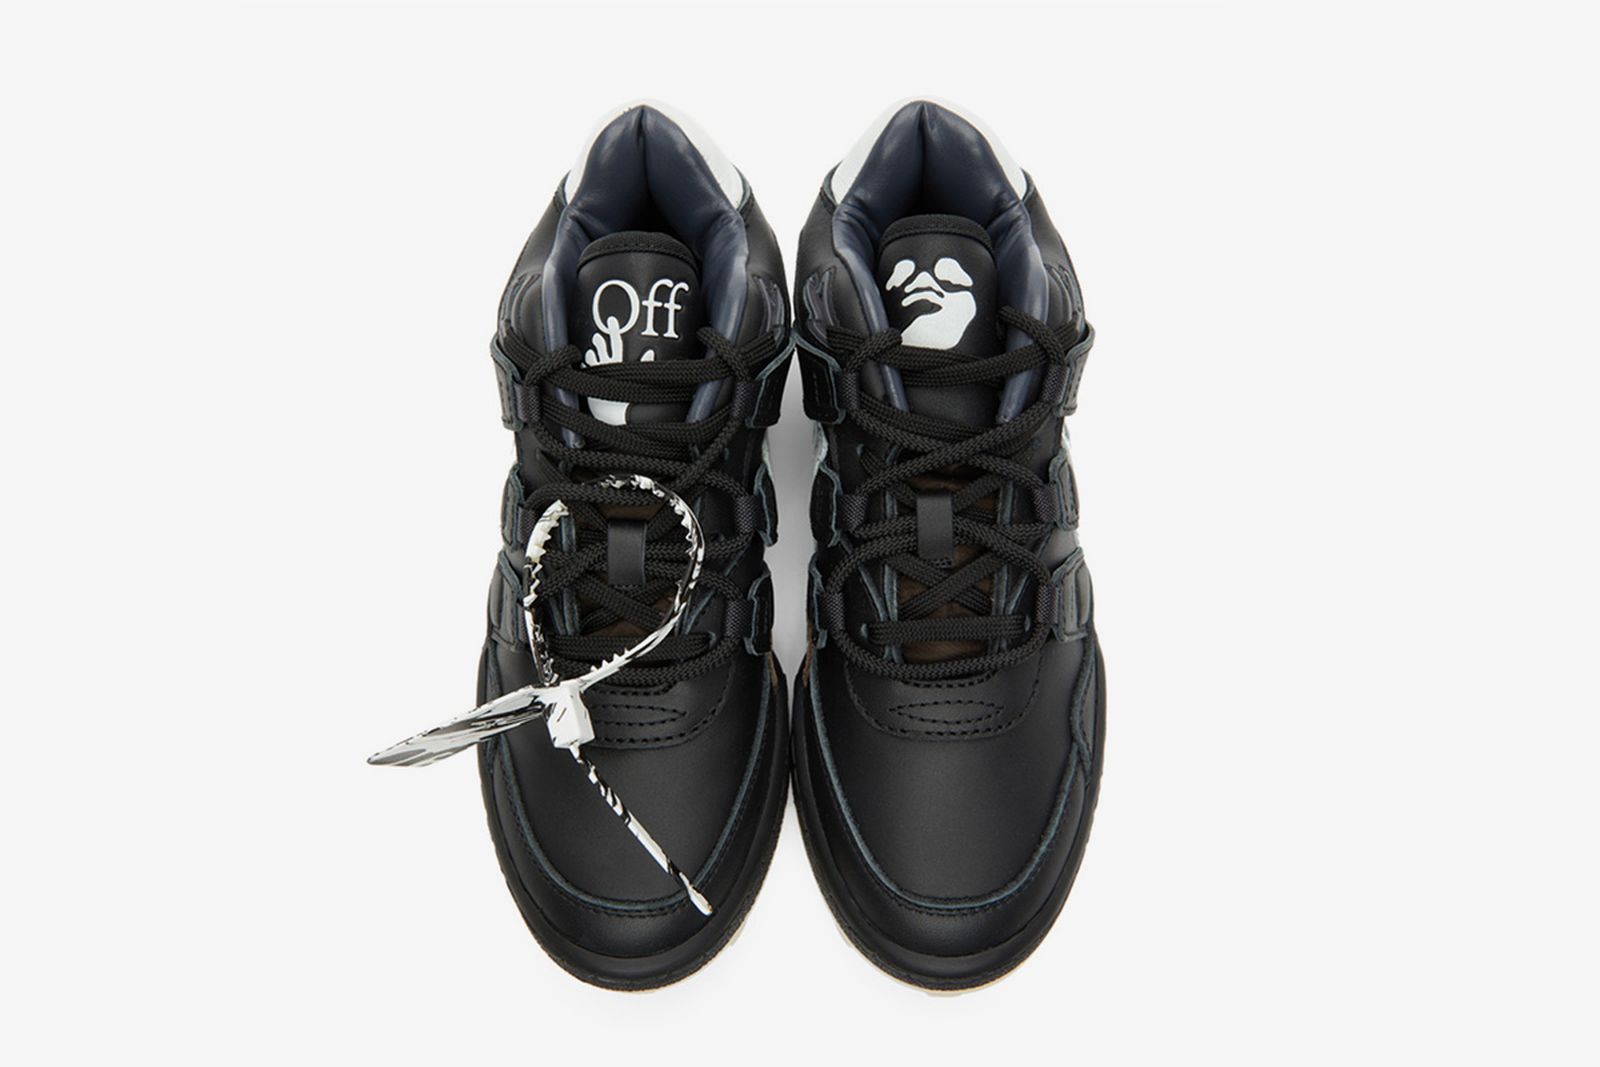 off-white-black-and-white-mountain-cleats-sneakers-02